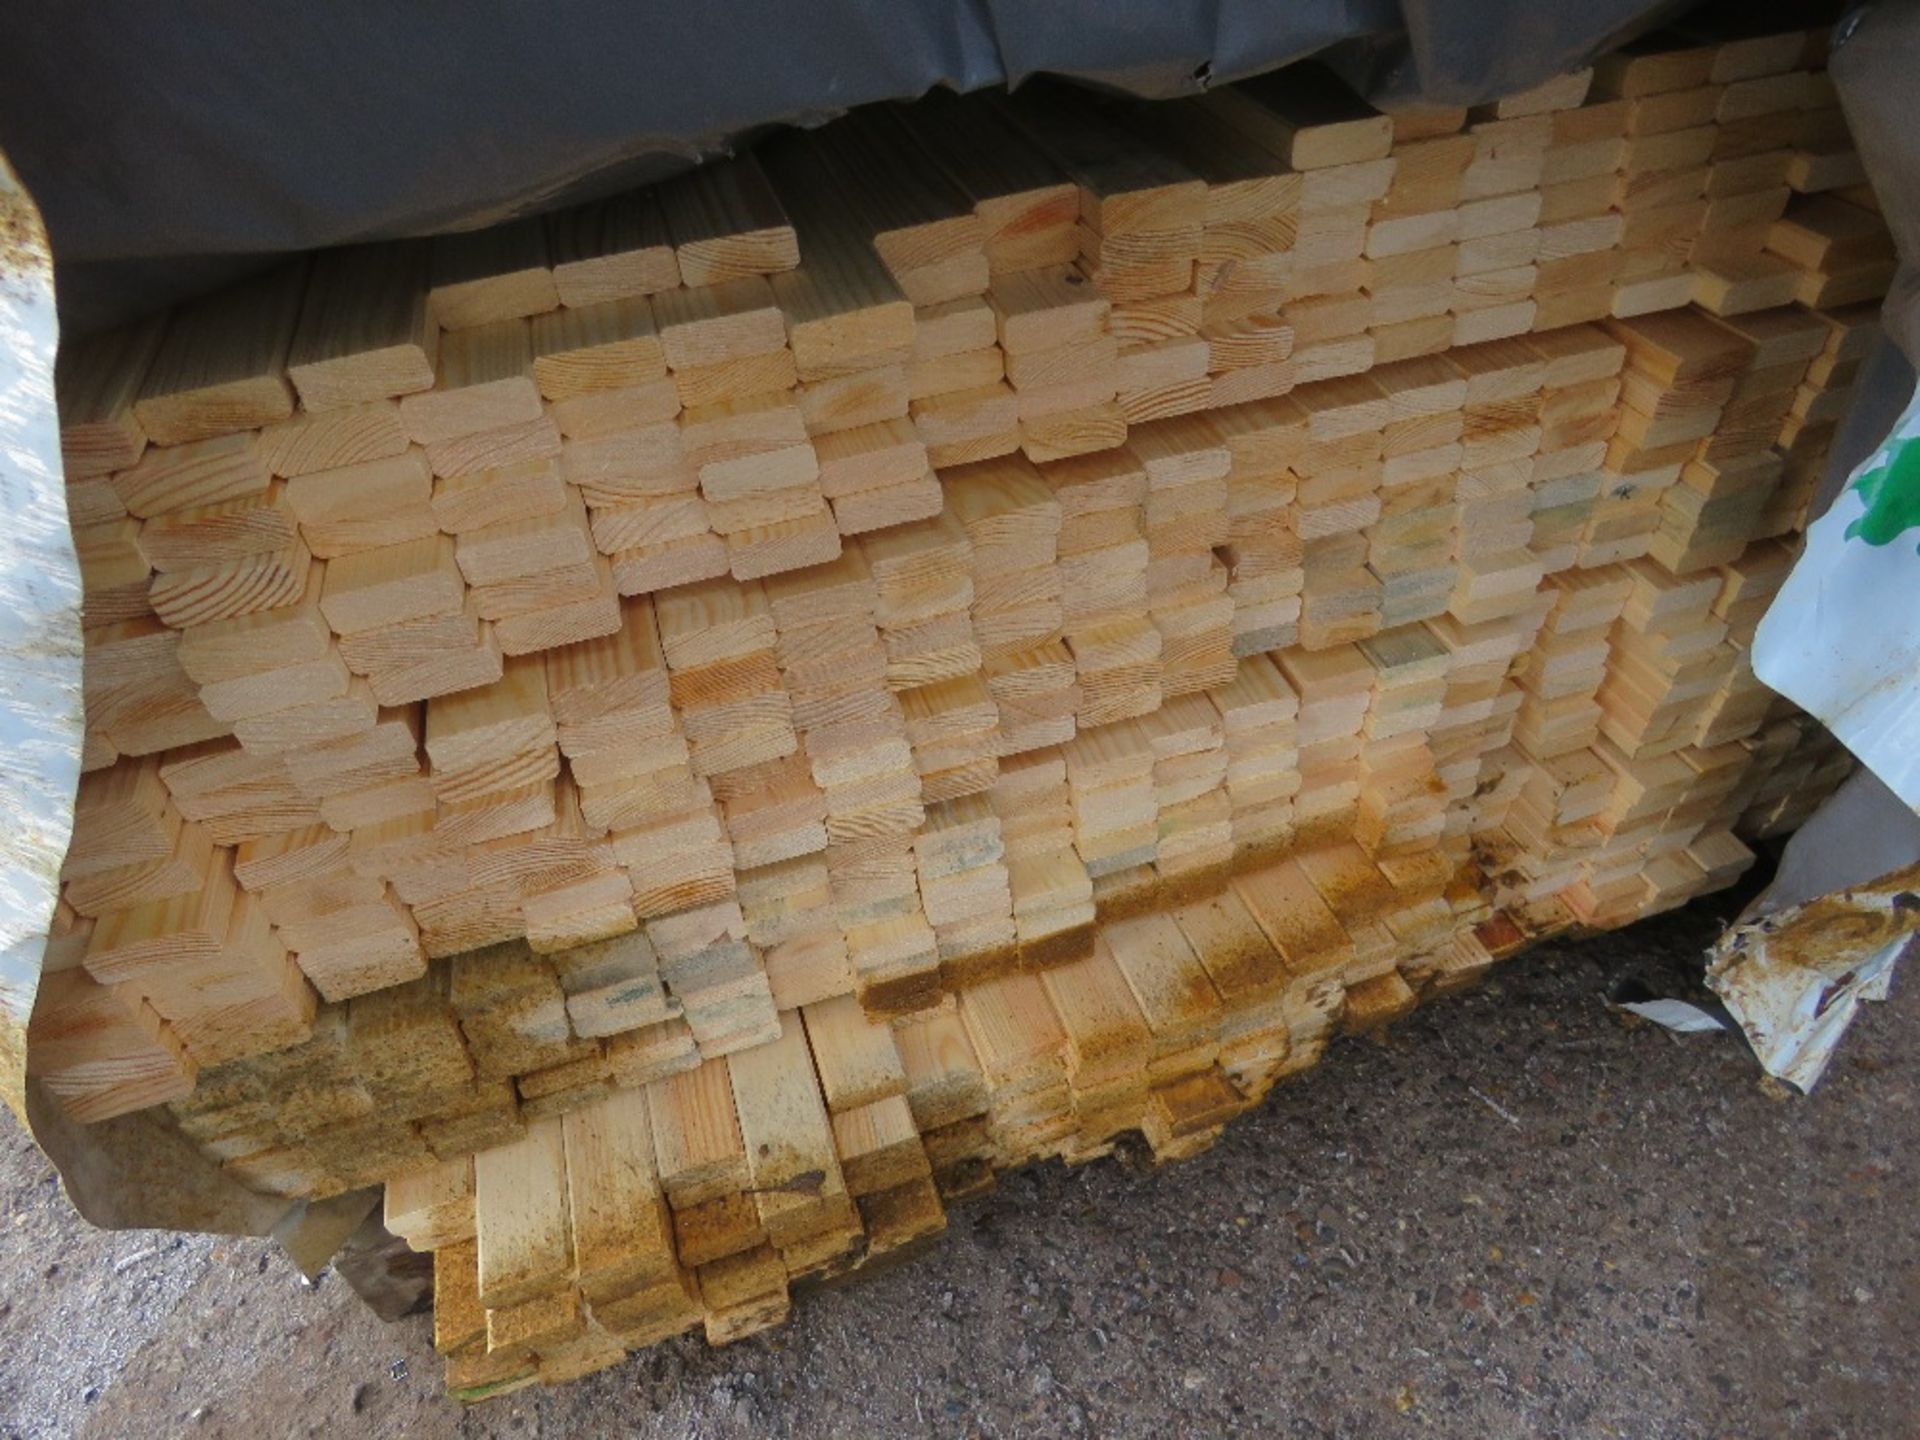 2 X PACKS OF UNTREATED VENETIAN PALE FENCE CLADDING TIMBER SLATS: 1.75M AND 1.47M LENGTH X 45MM WID - Image 4 of 5